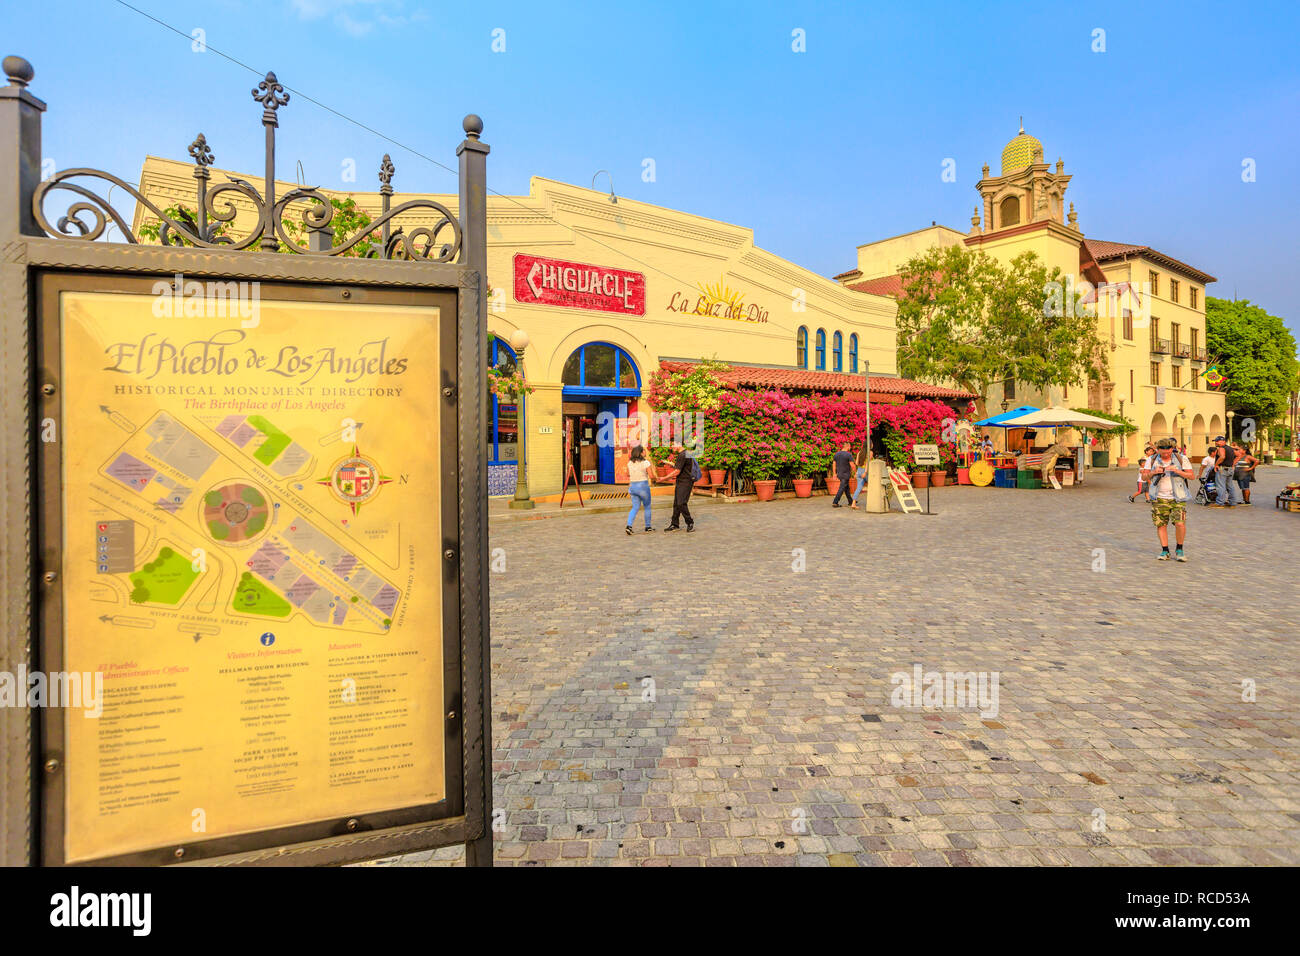 Los Angeles, California, United States - August 9, 2018: Spanish architecture in historic center of El Pueblo de Los Angeles, Historical Monument Directory in Old Plaza, the oldest part of downtown LA Stock Photo